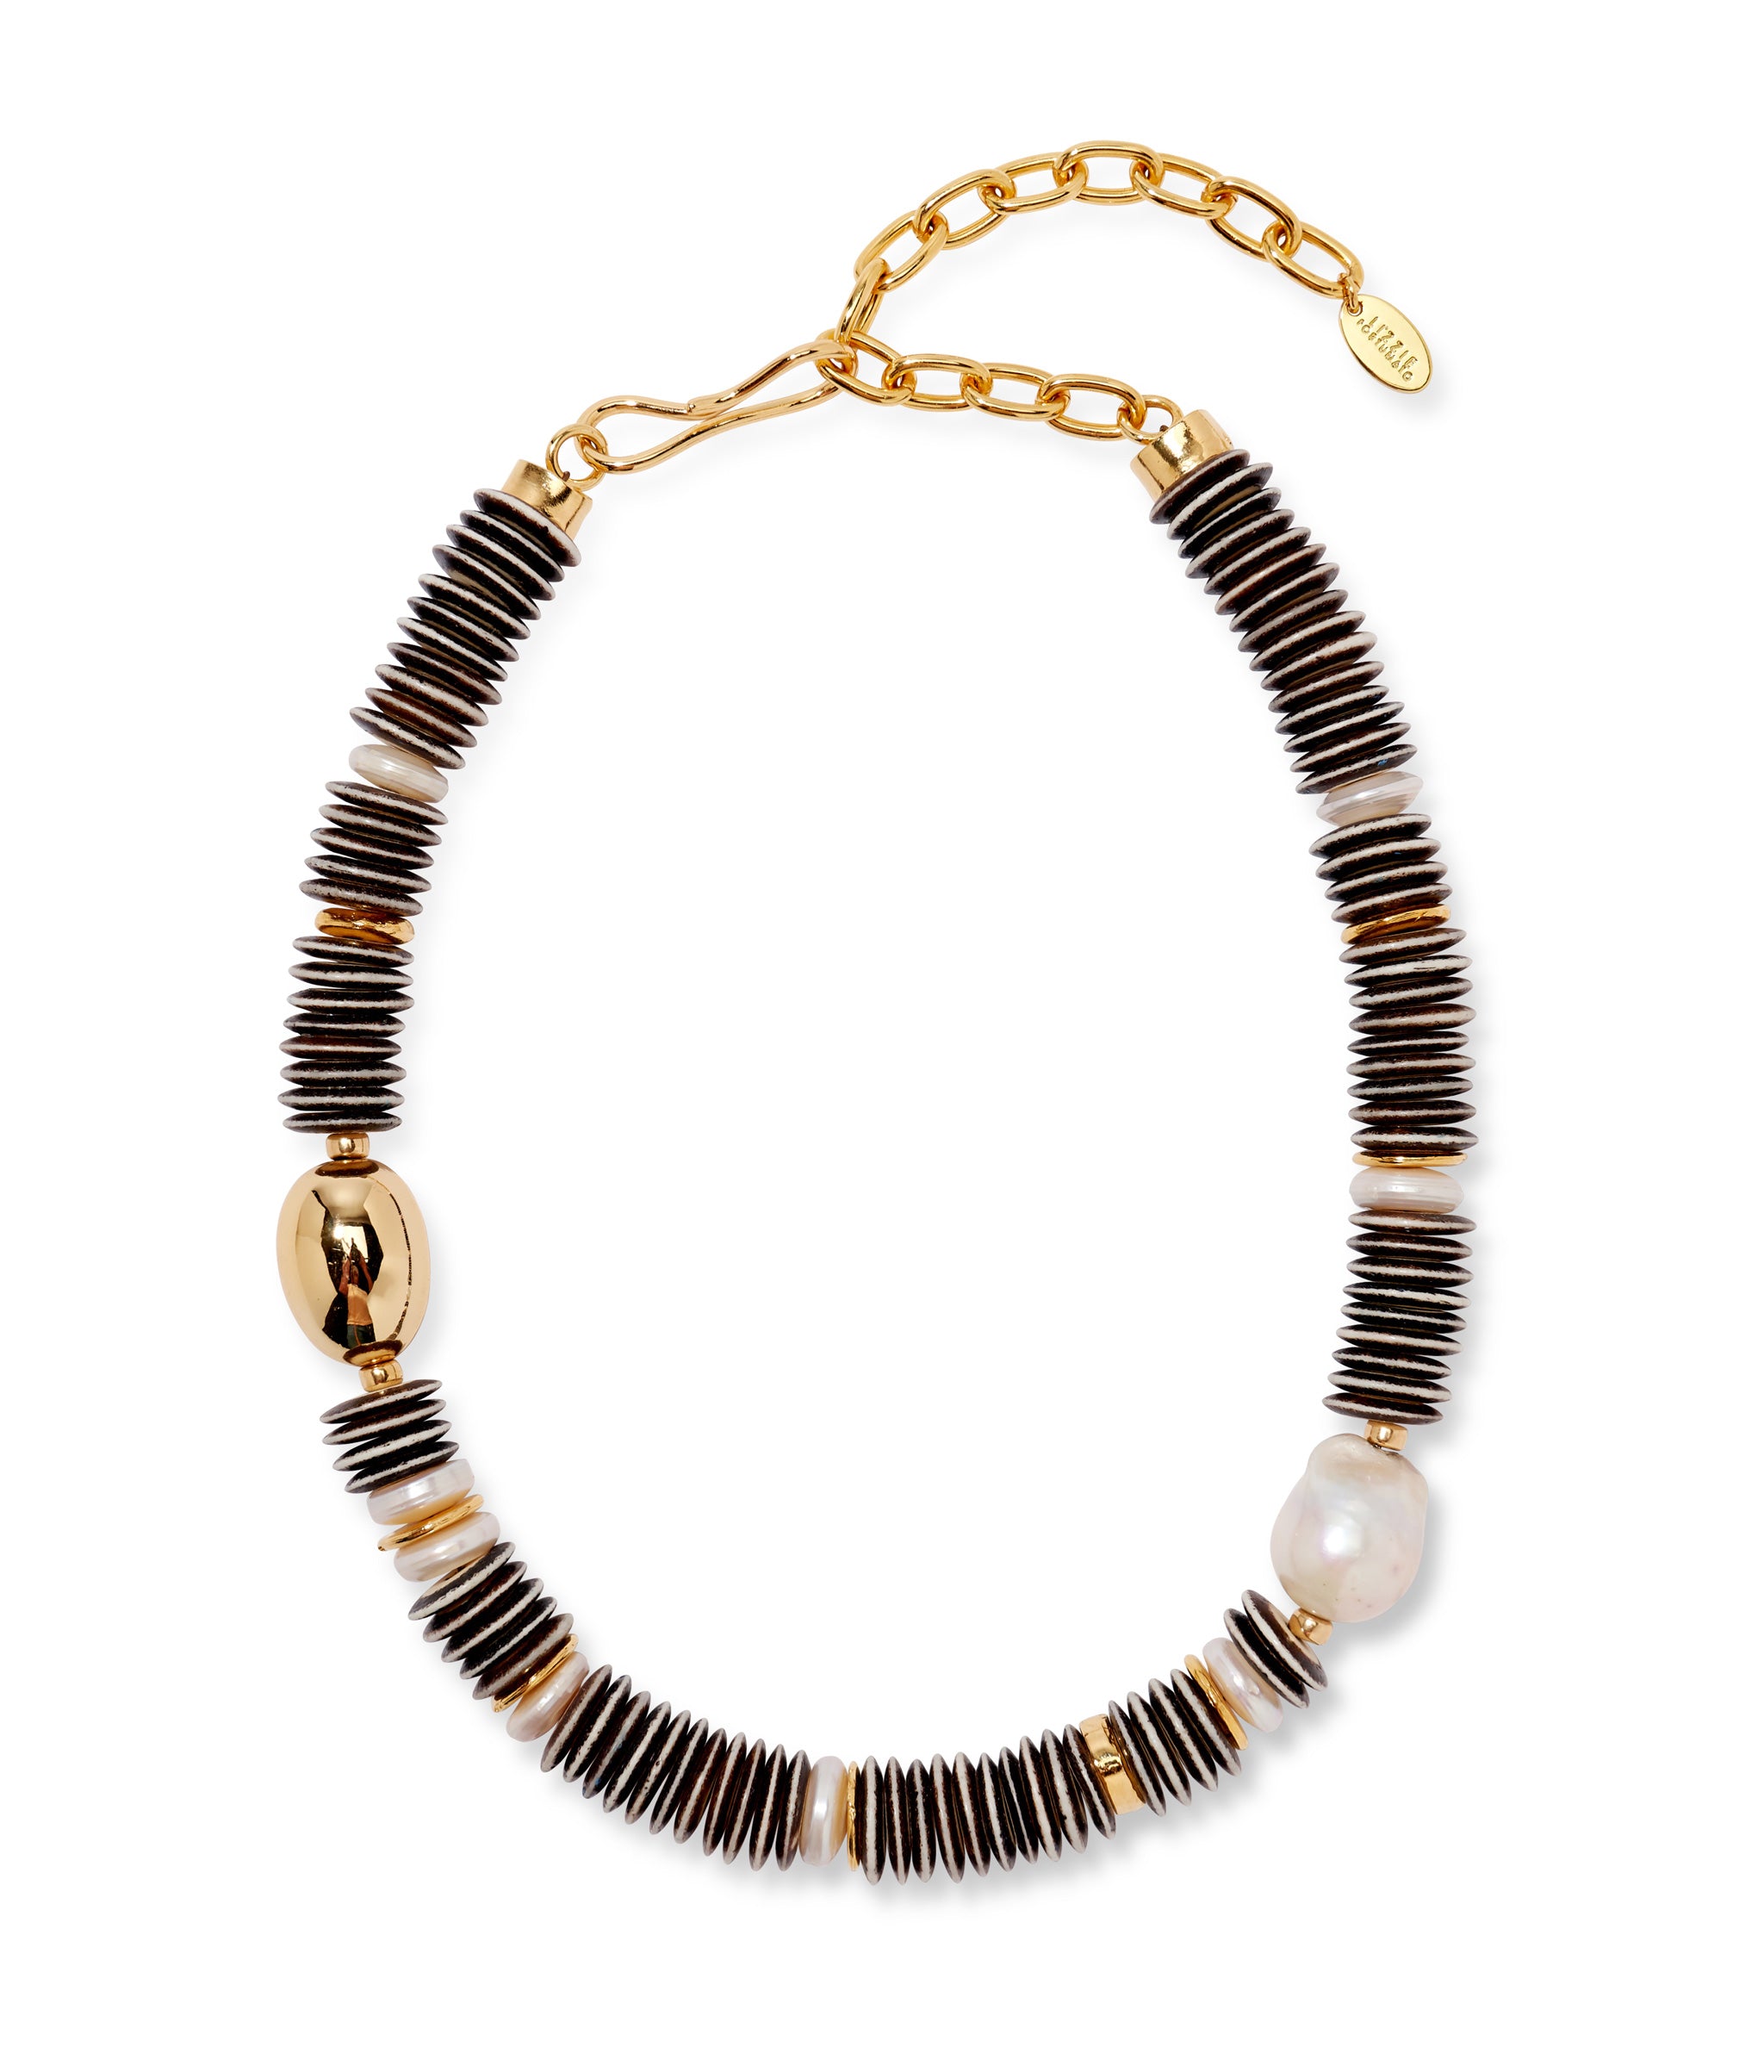 Prairie Necklace in Zebra. Black and white rustic bone beaded collar with gold beads and large freshwater pearl accents.